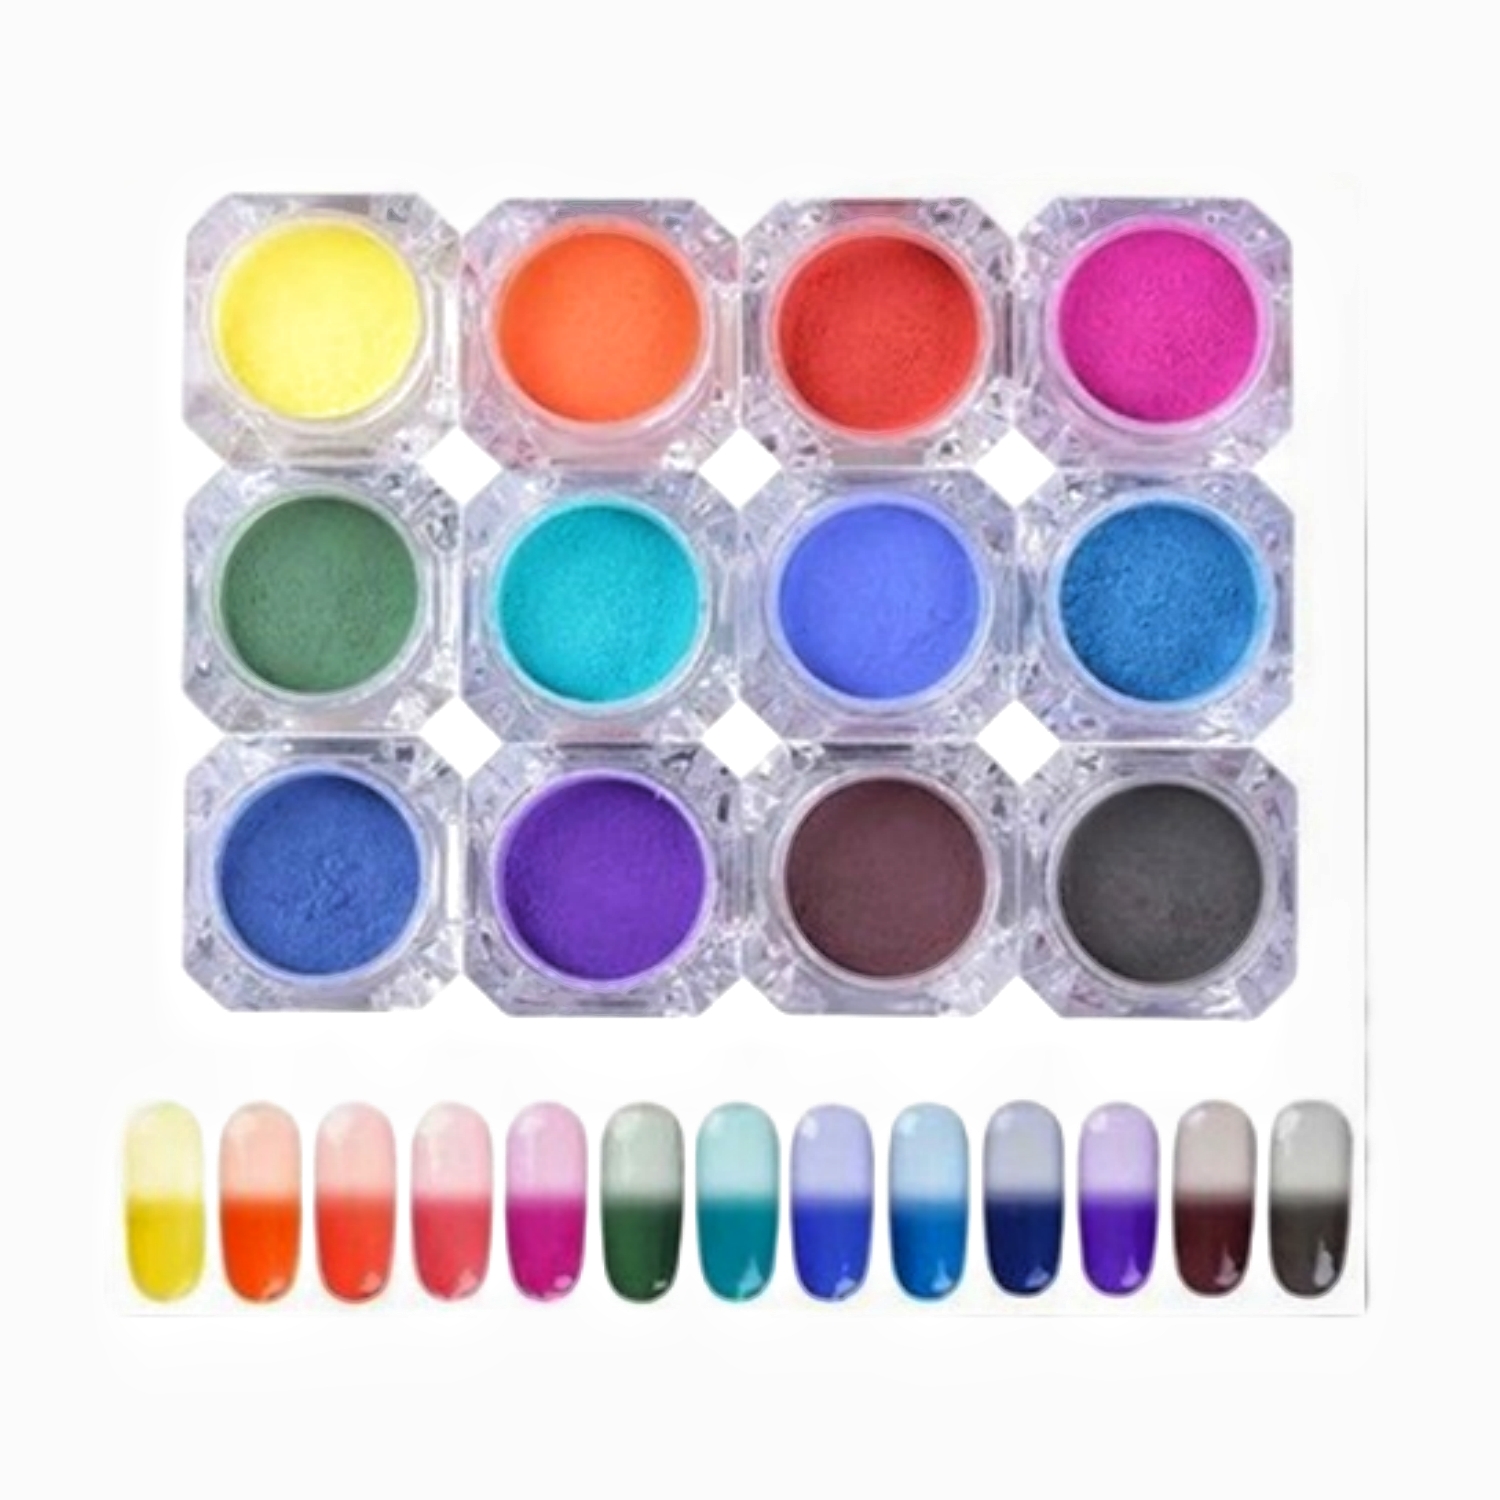 Thermochromic Pigments - Rainbow Pack (7 Colors) : ID 4233